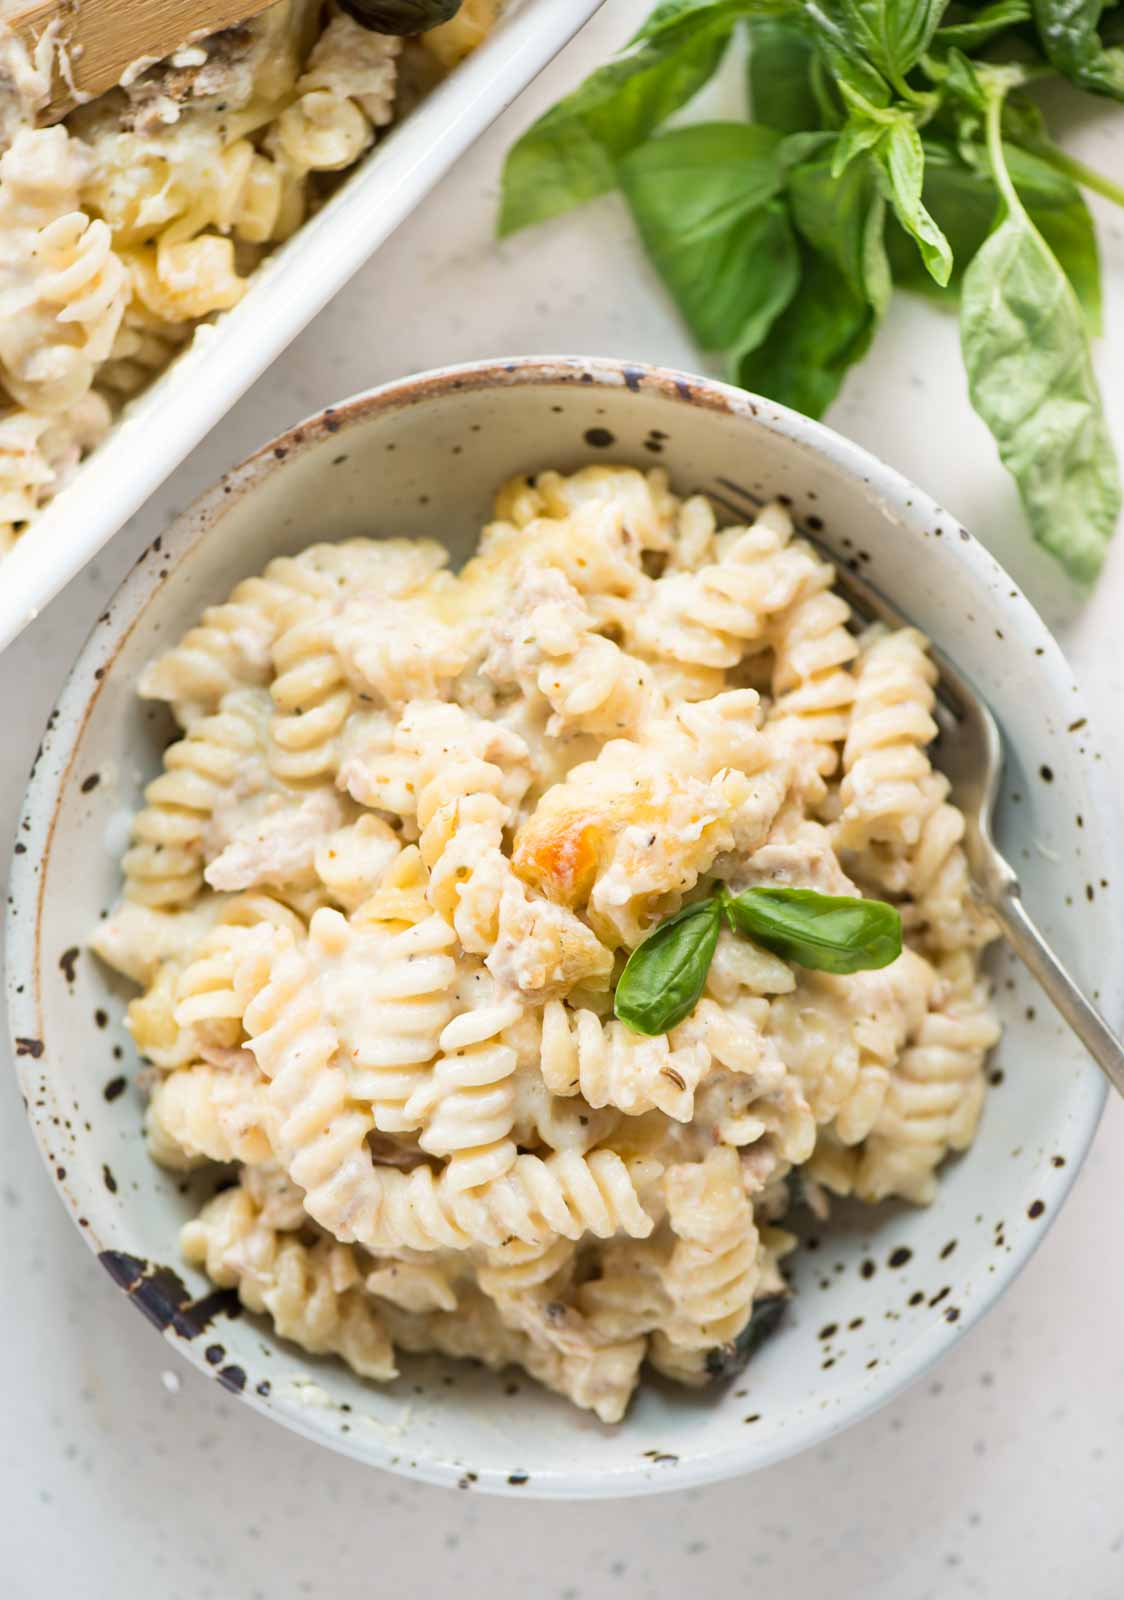 Creamy and indulgent baked pasta with Tuna is a comfort meal that the entire family loves. Canned tuna and pasta tossed in a creamy cheesy sauce and baked until bubbly. 